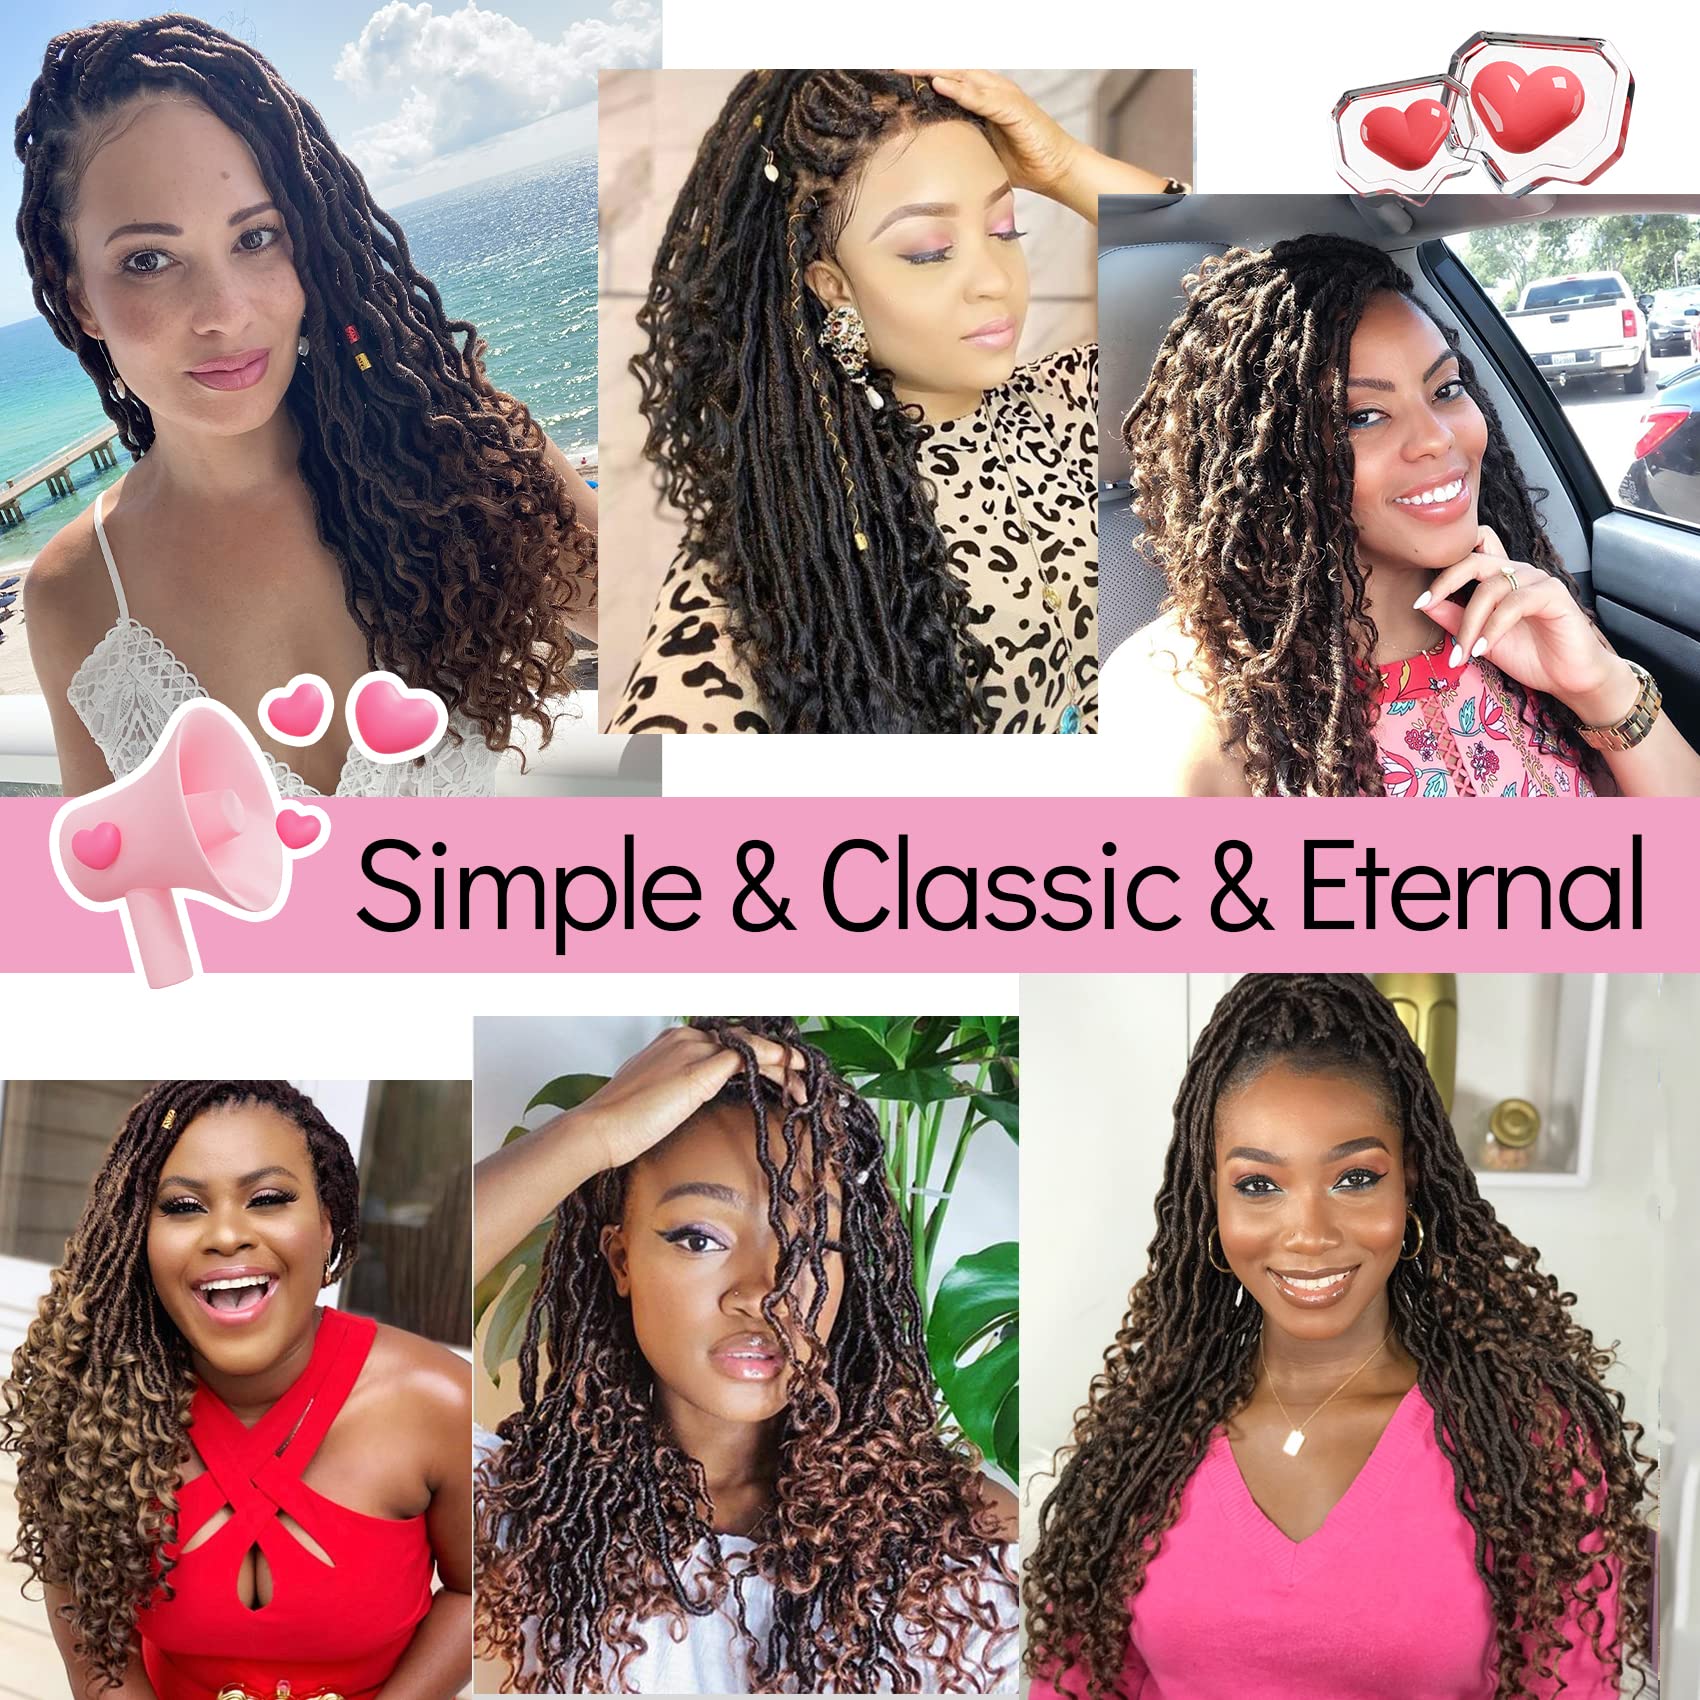 Karida Faux Locs Crochet Hair 6Pcs/Lot Curly Deep Wave Braiding Hair With Curly Ends Crochet Goddess Locs Synthetic Braids Hair Extensions (18 inch, T30#)